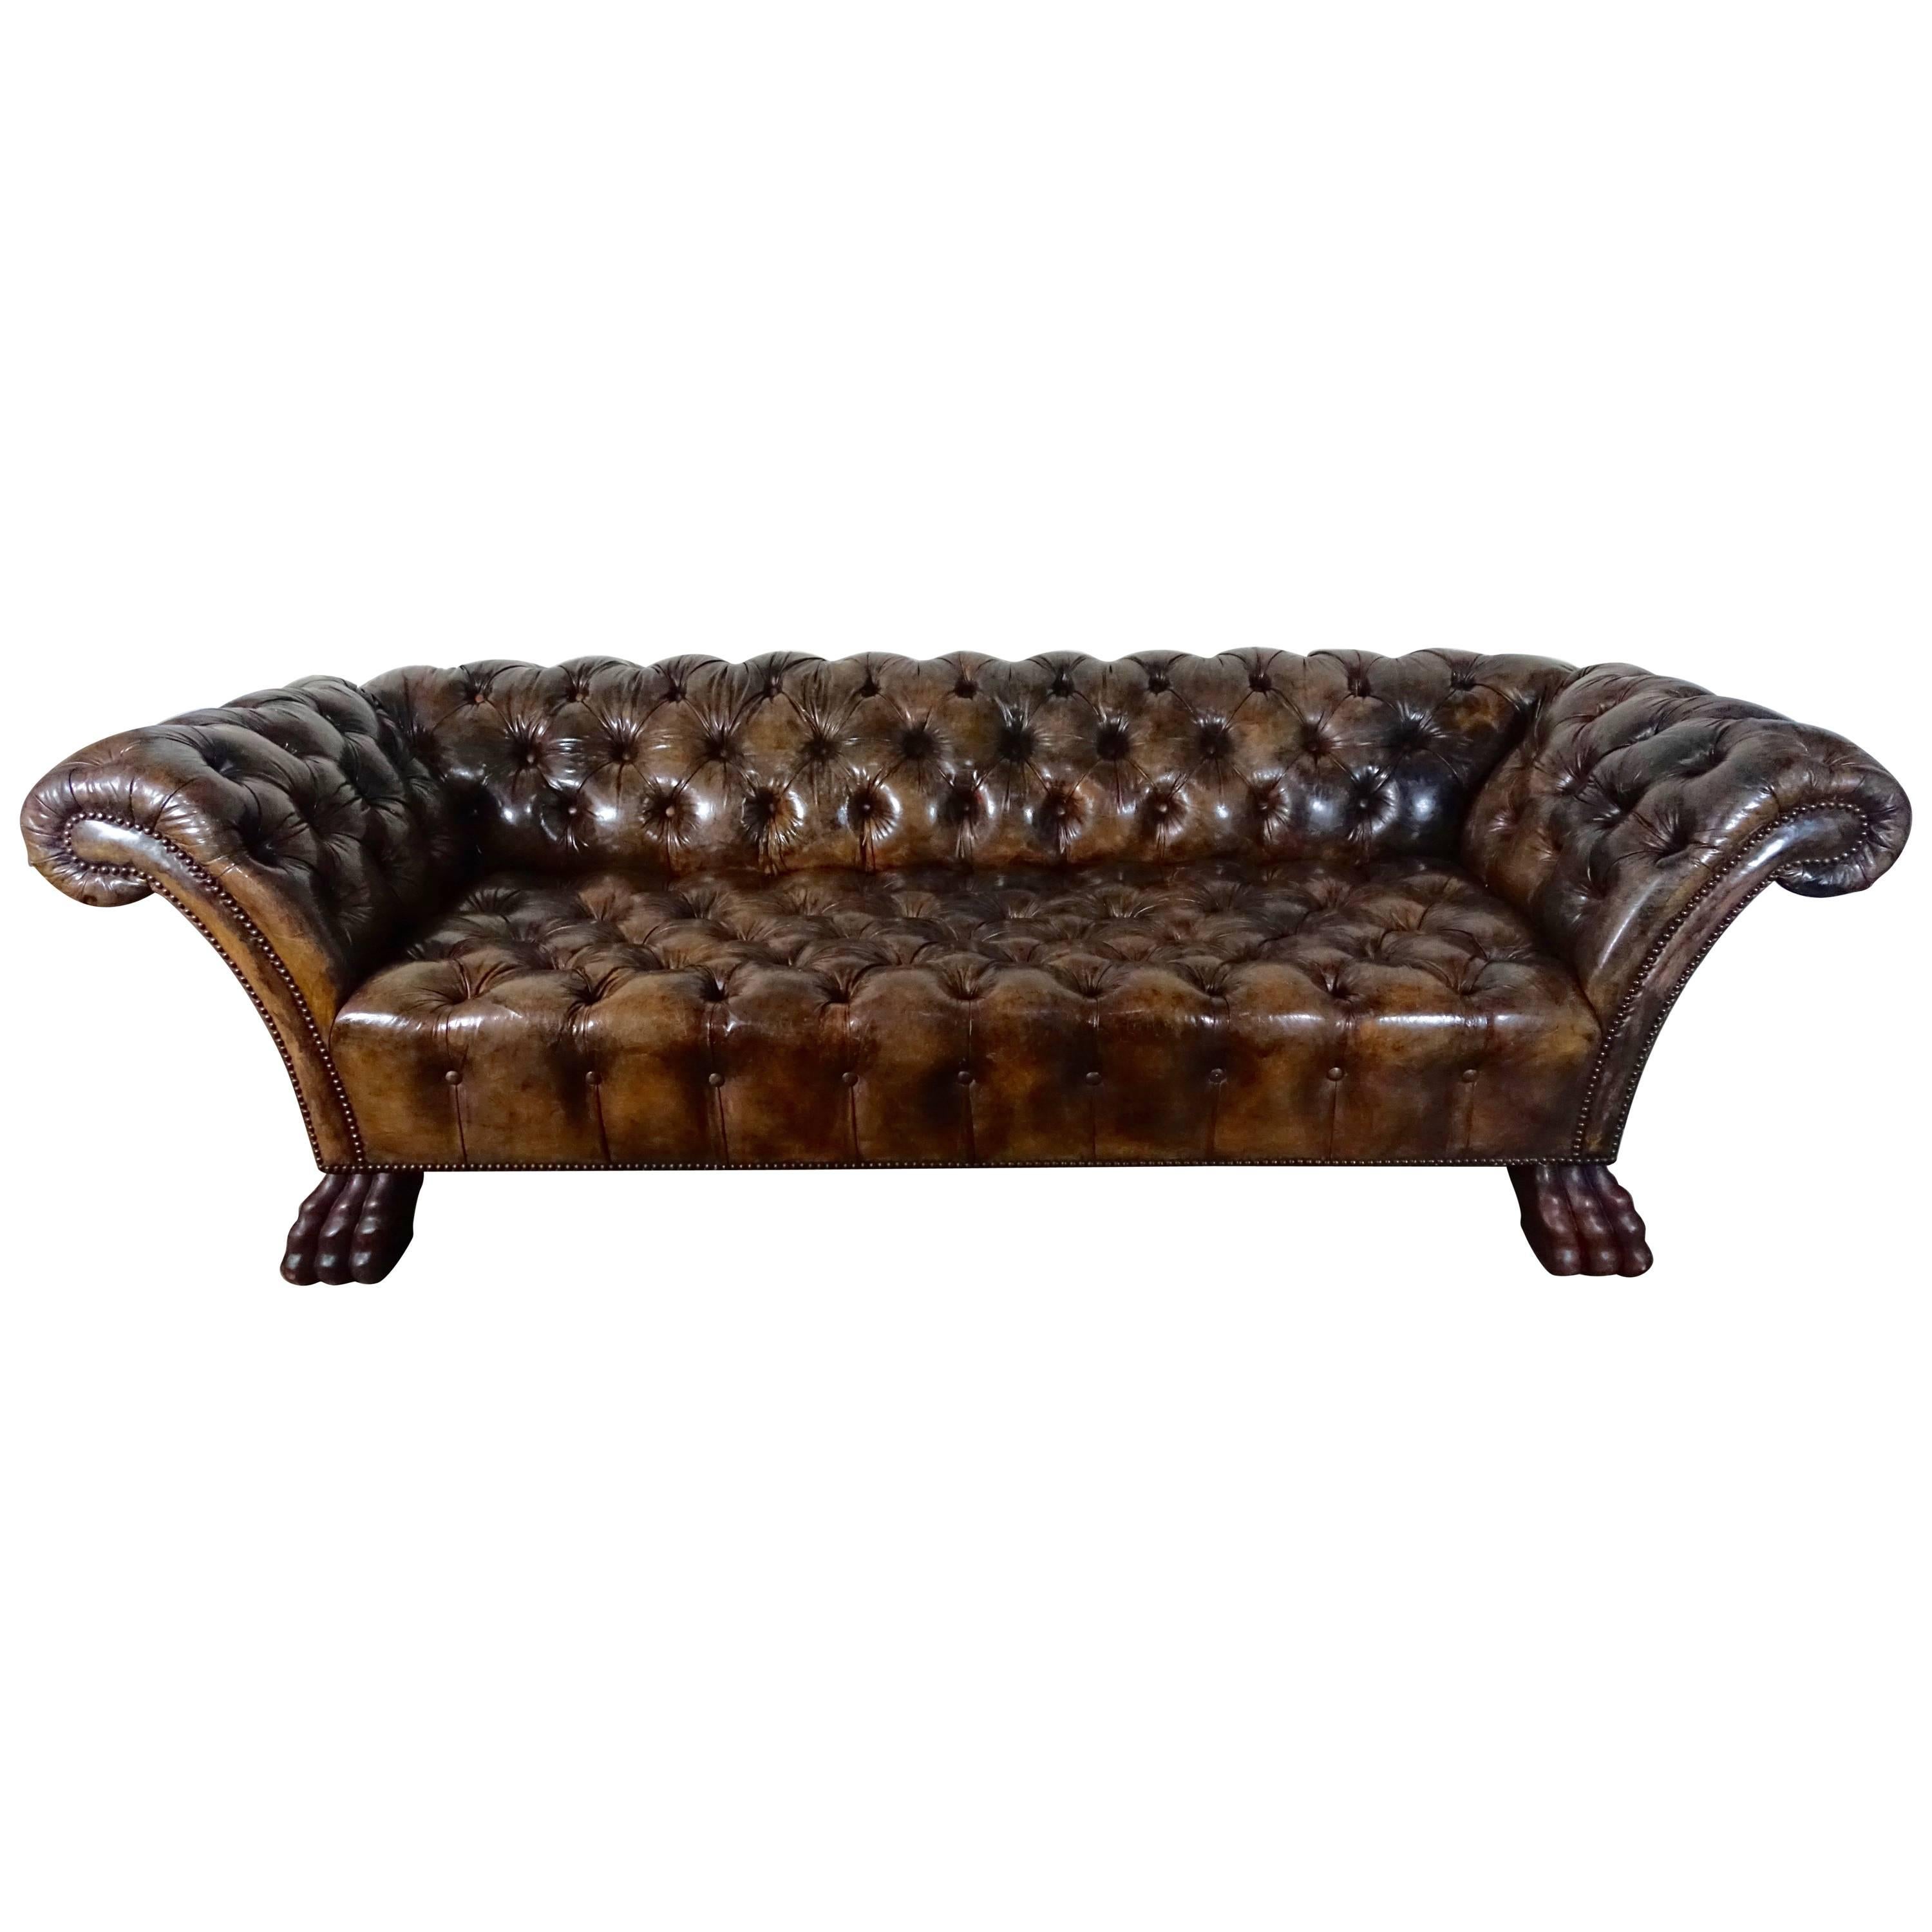 English Leather Tufted Chesterfield Style Sofa with Paw Feet